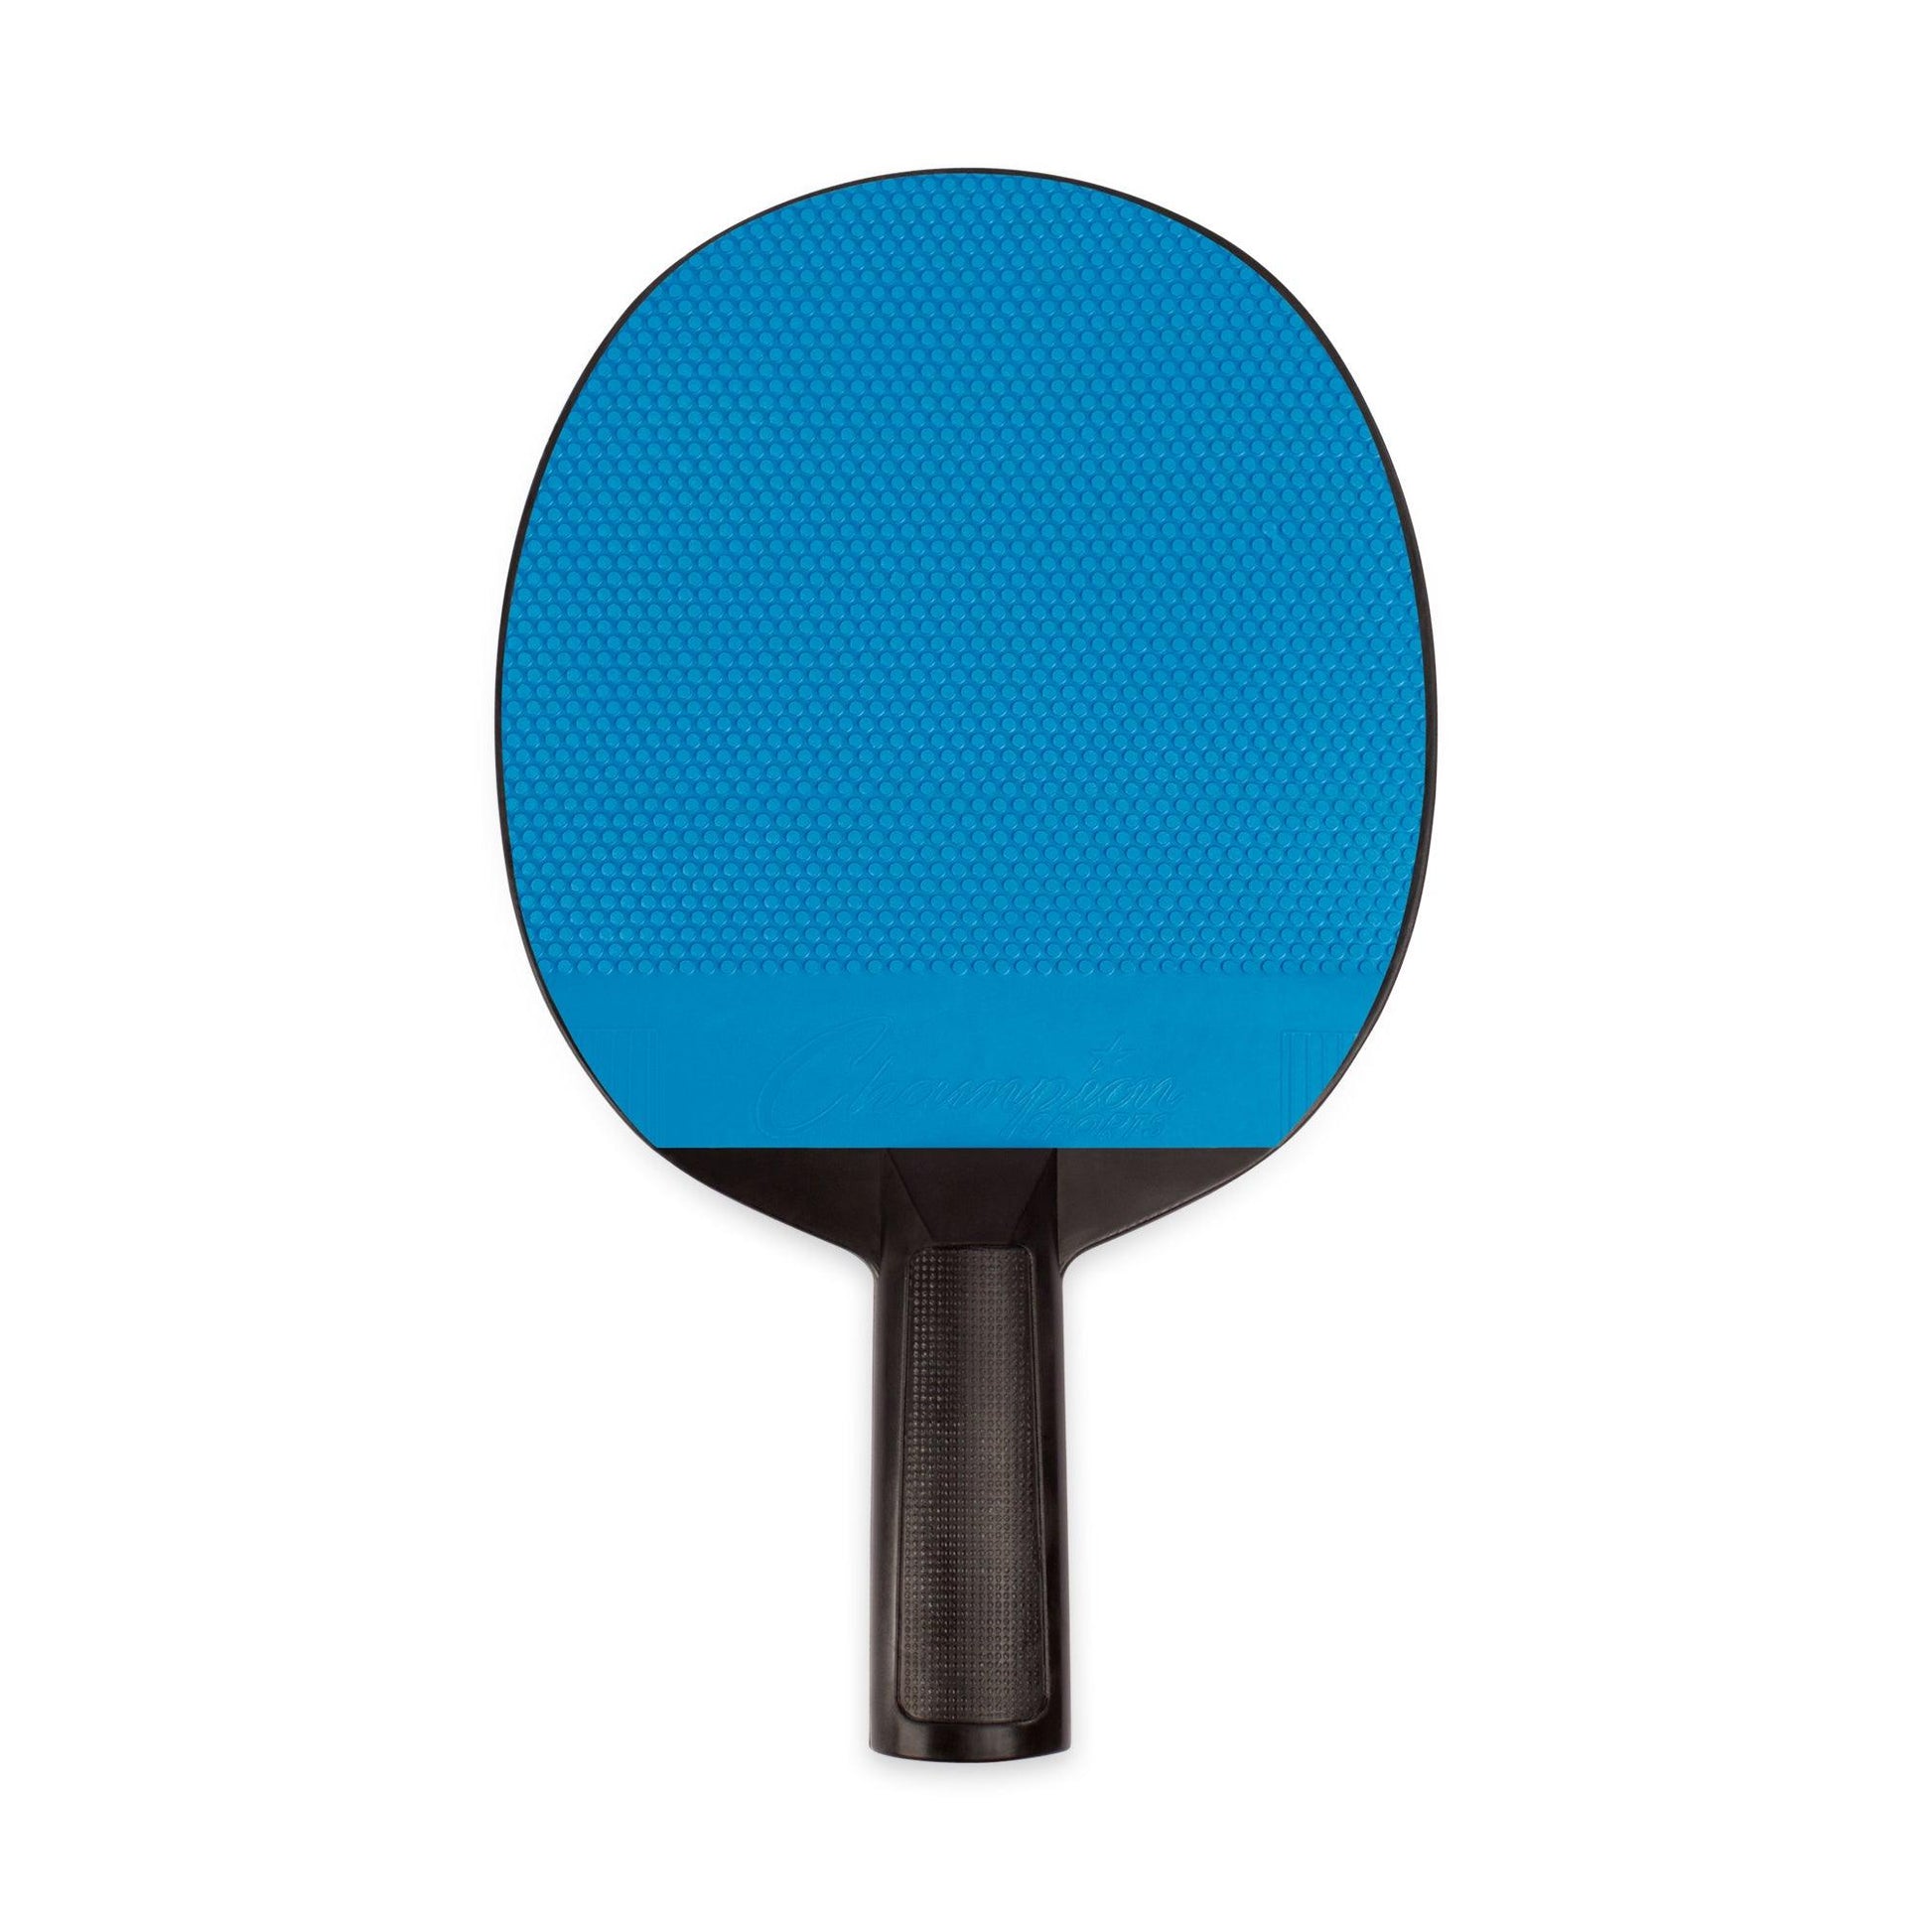 Plastic Rubber Face Table Tennis Paddle, Pack of 6 - Loomini